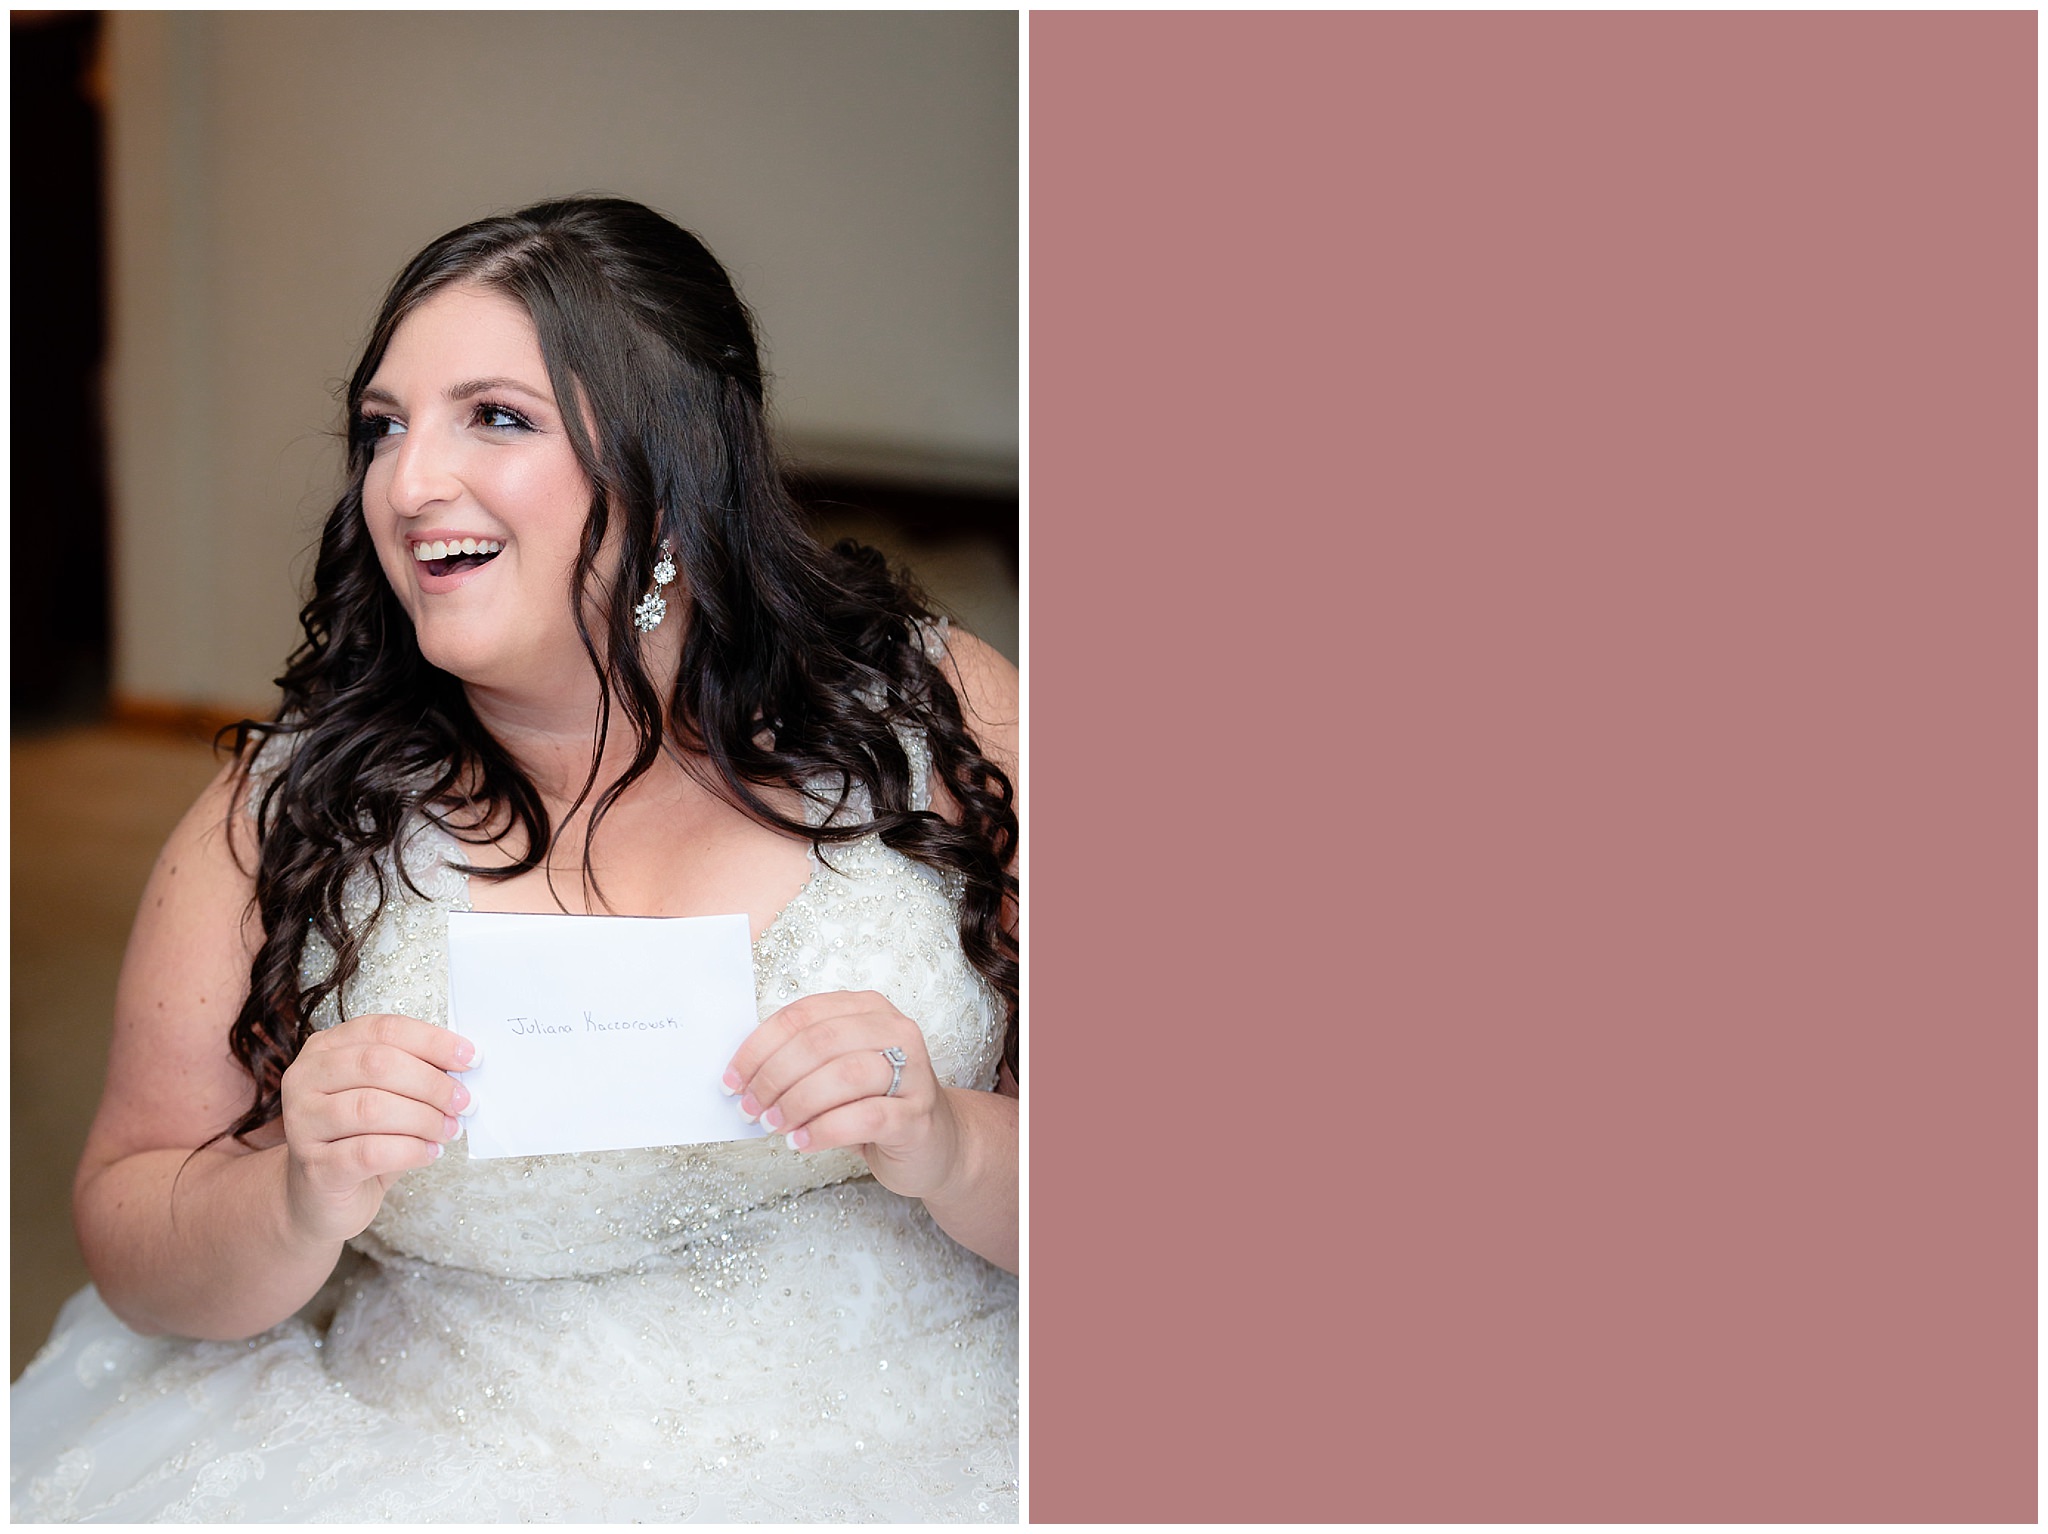 Bride laughs before reading a letter from her groom